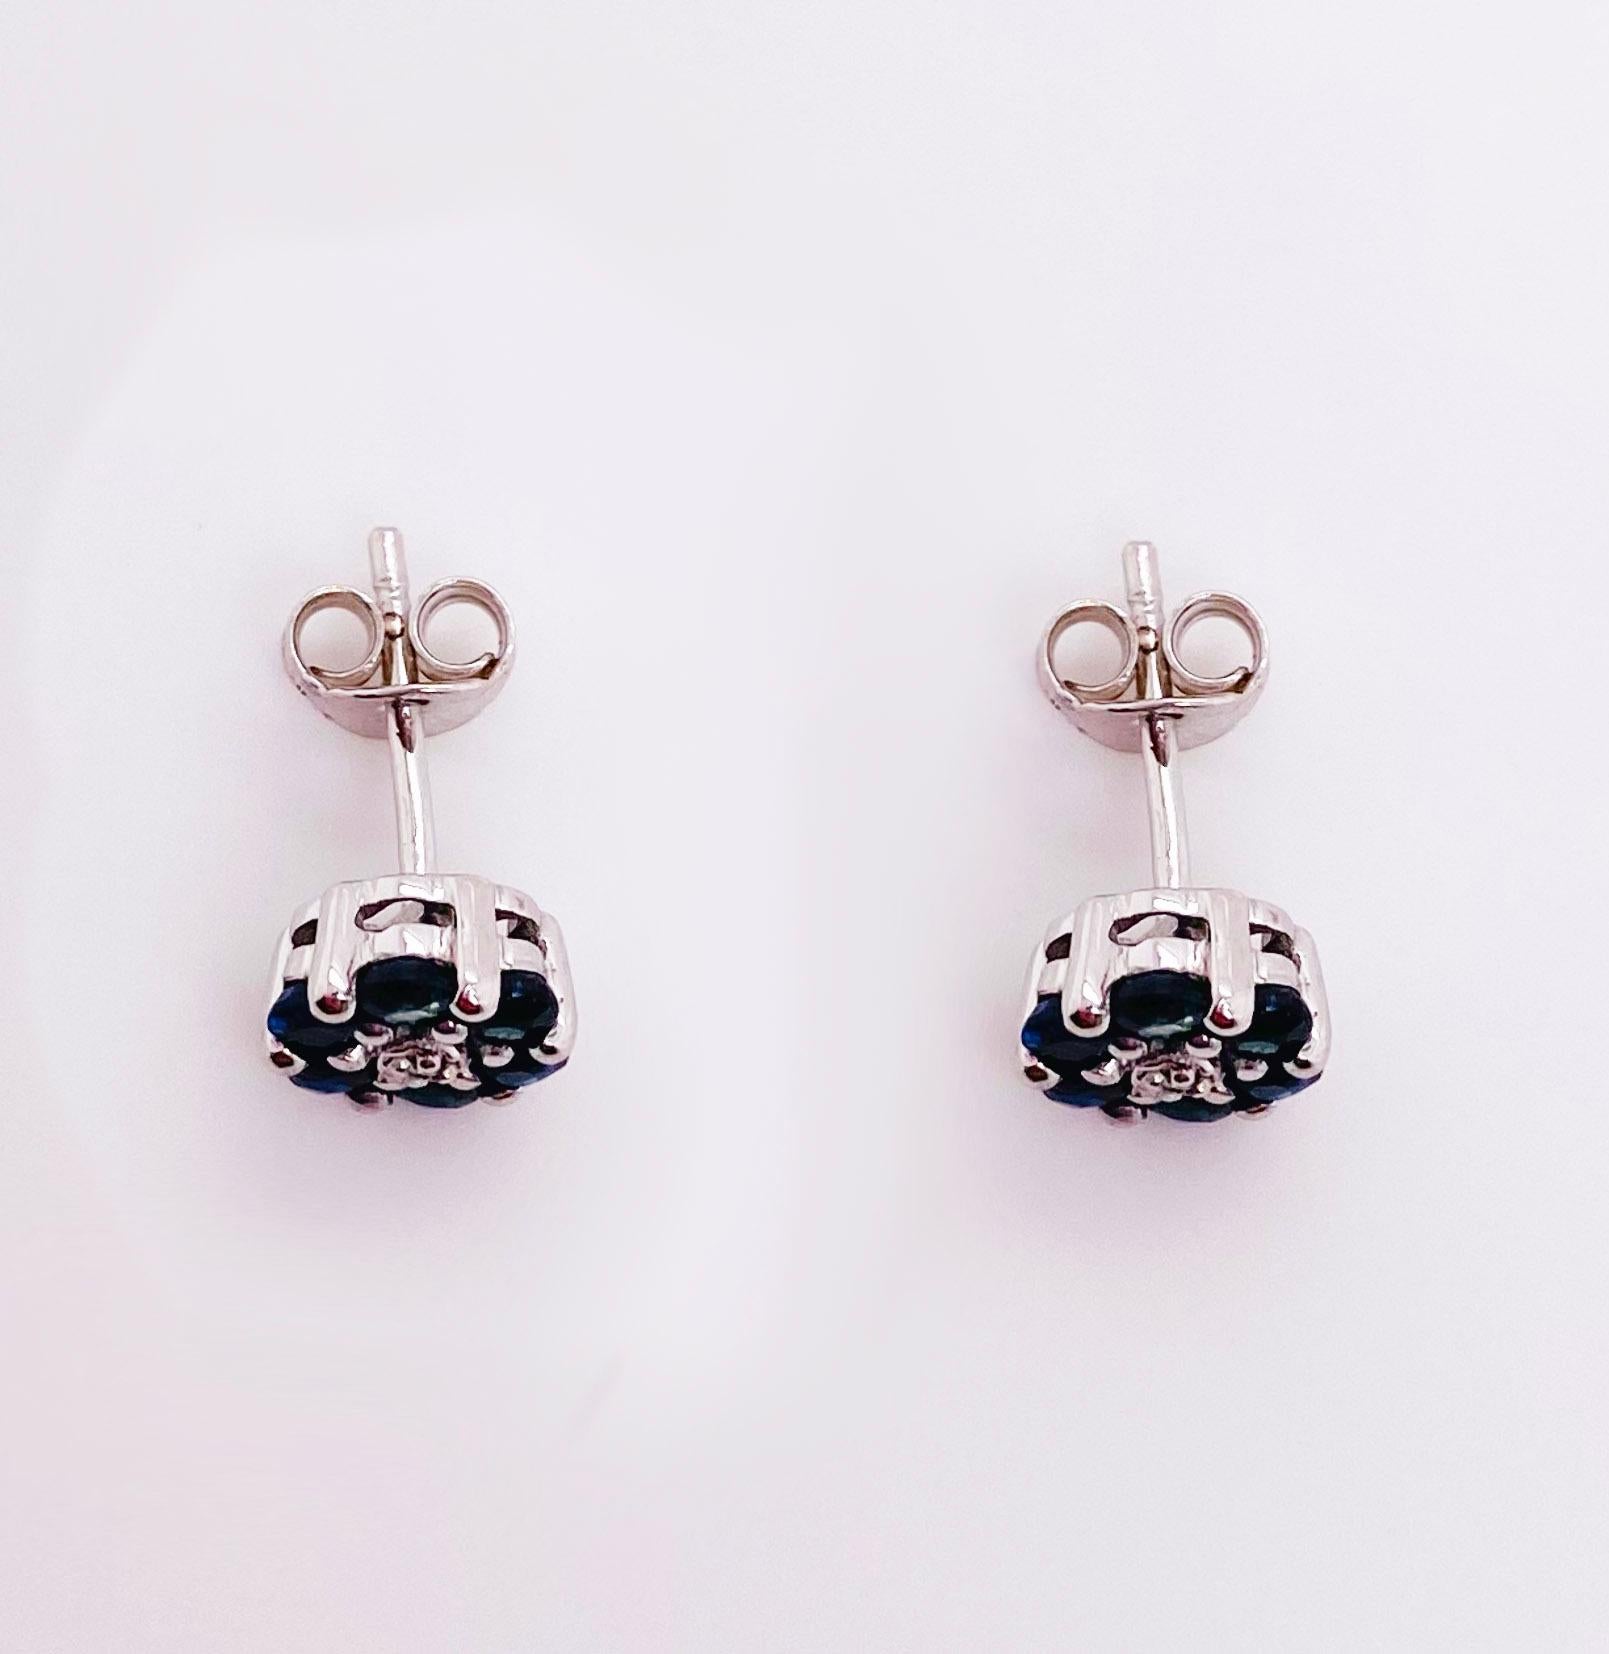 These blue sapphire earrings with a diamond in the center make the perfect blossom for each earlobe! Sapphires are so classic and match any outfit.  You will feel great when wearing these earrings! The details for these gorgeous earrings are listed